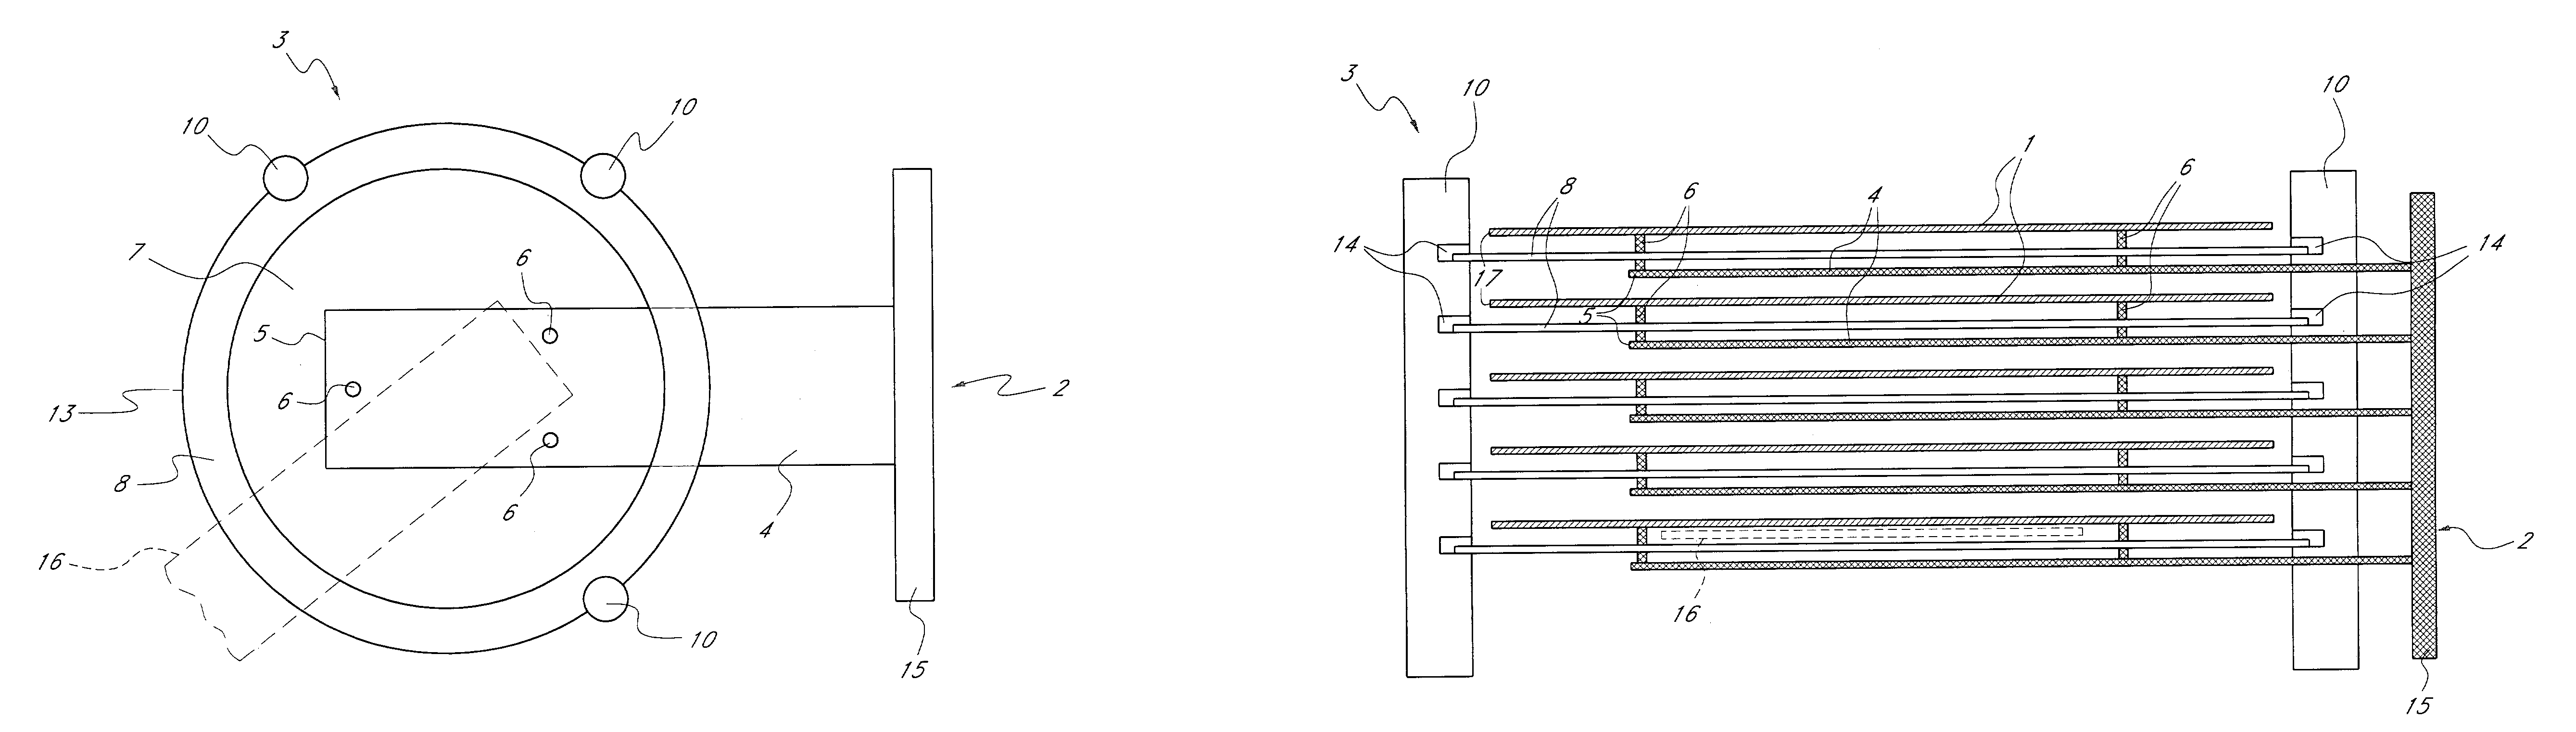 Method and apparatus for loading a batch of wafers into a wafer boat